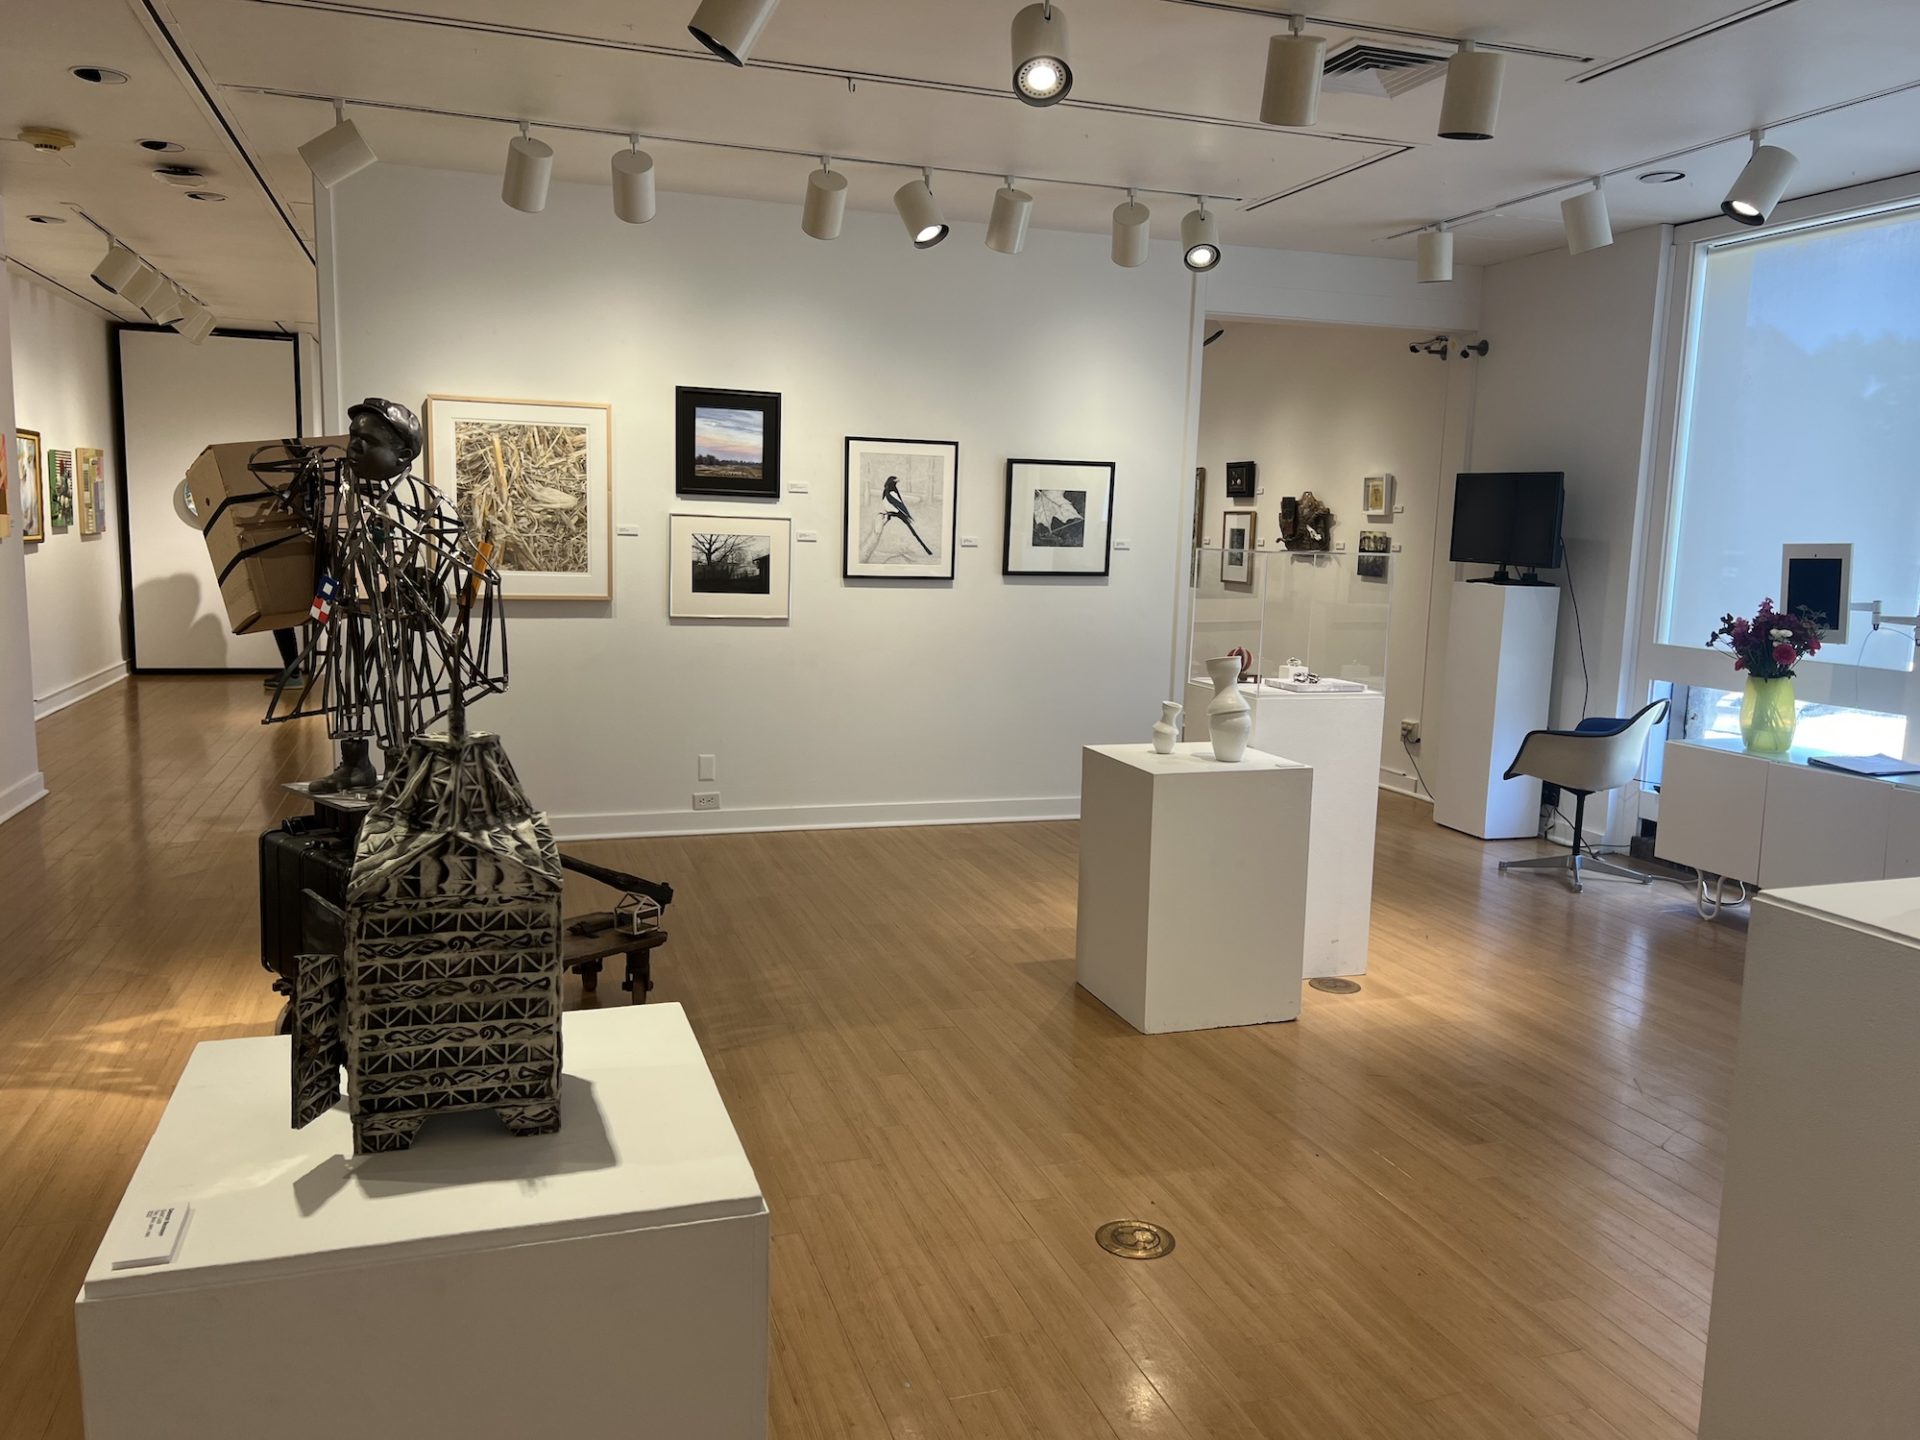 An overview shot of the art around the block gallery show. In the foreground are various sculptures on white square pedestals. On the far wall are small pieces of artwork. There is an open doorway on the right leading to the second half of the gallery.